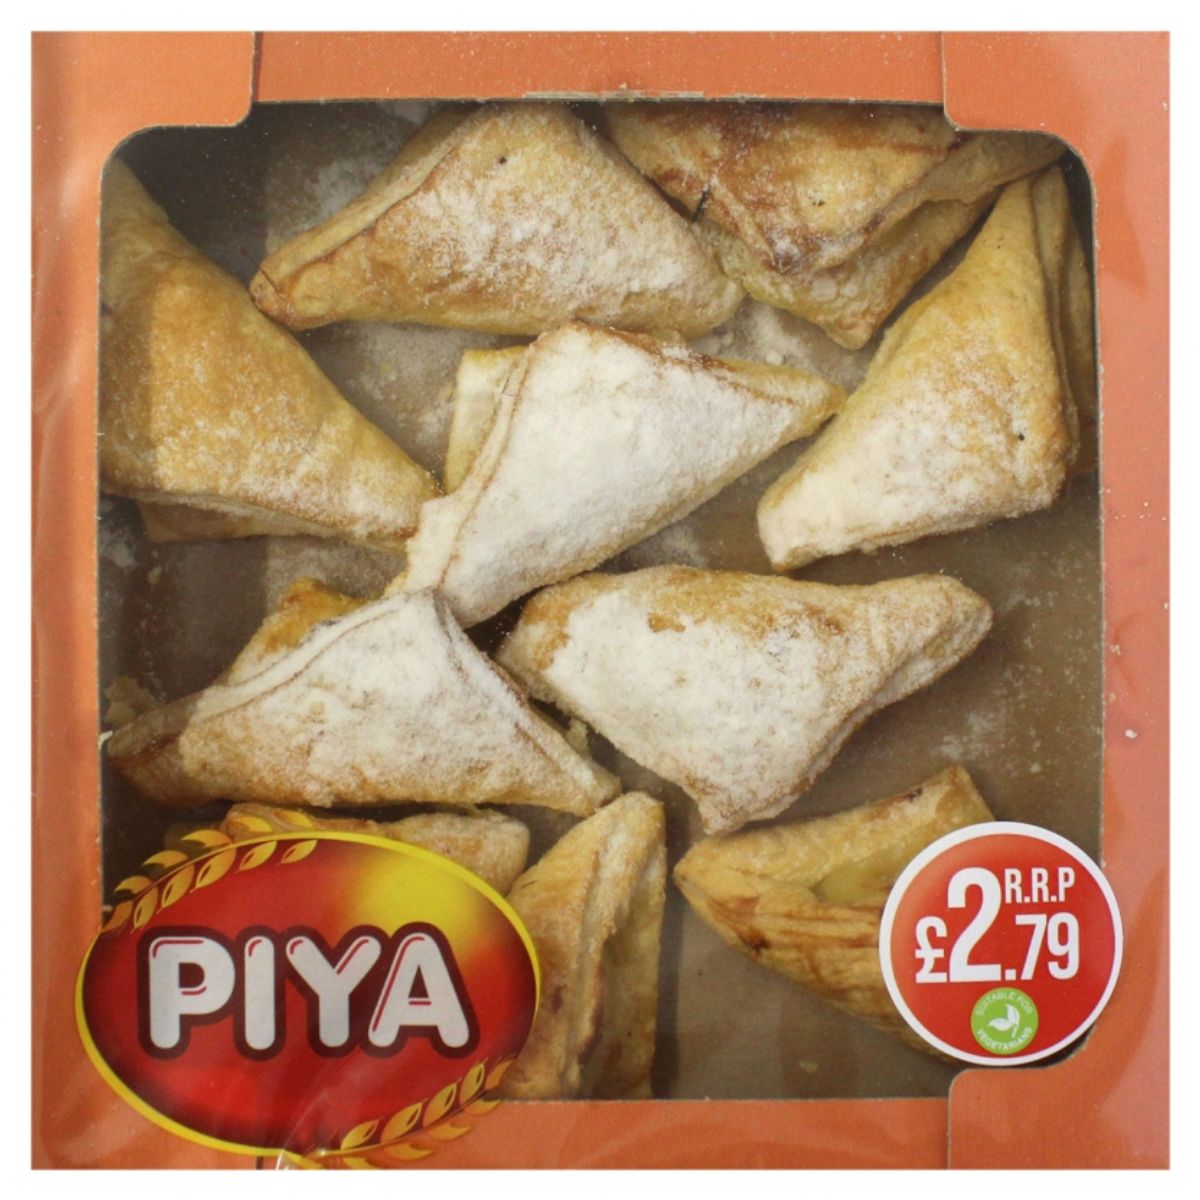 A box of Piya - Cresents with Pudding - 270g pastries in a box.